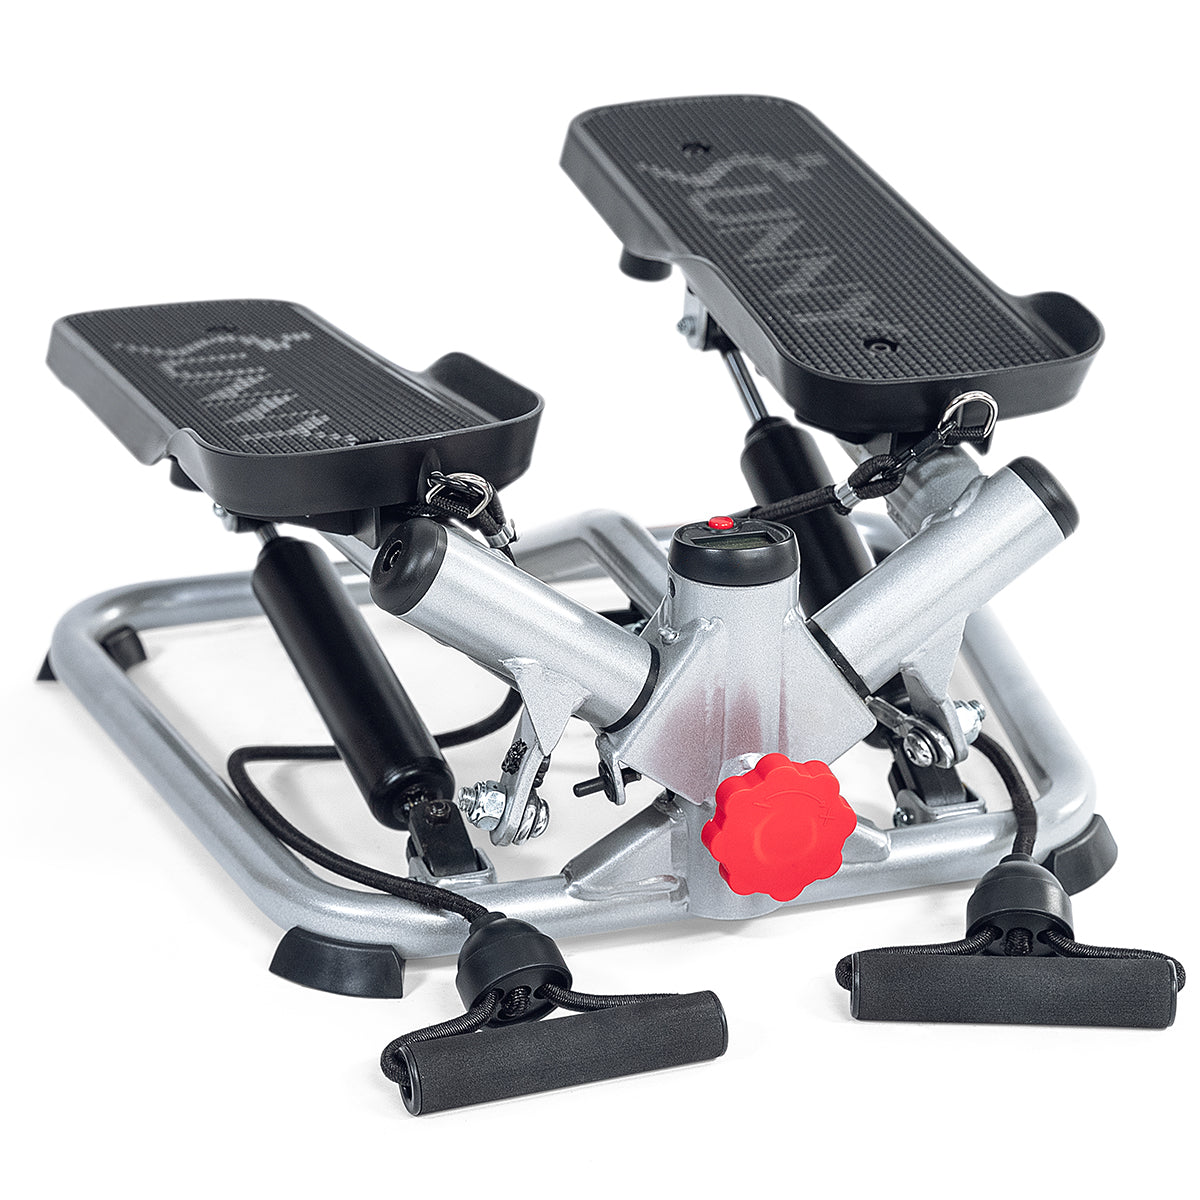 Tokyu Sports Oasis Twist Stepper Continuous use approximately 60